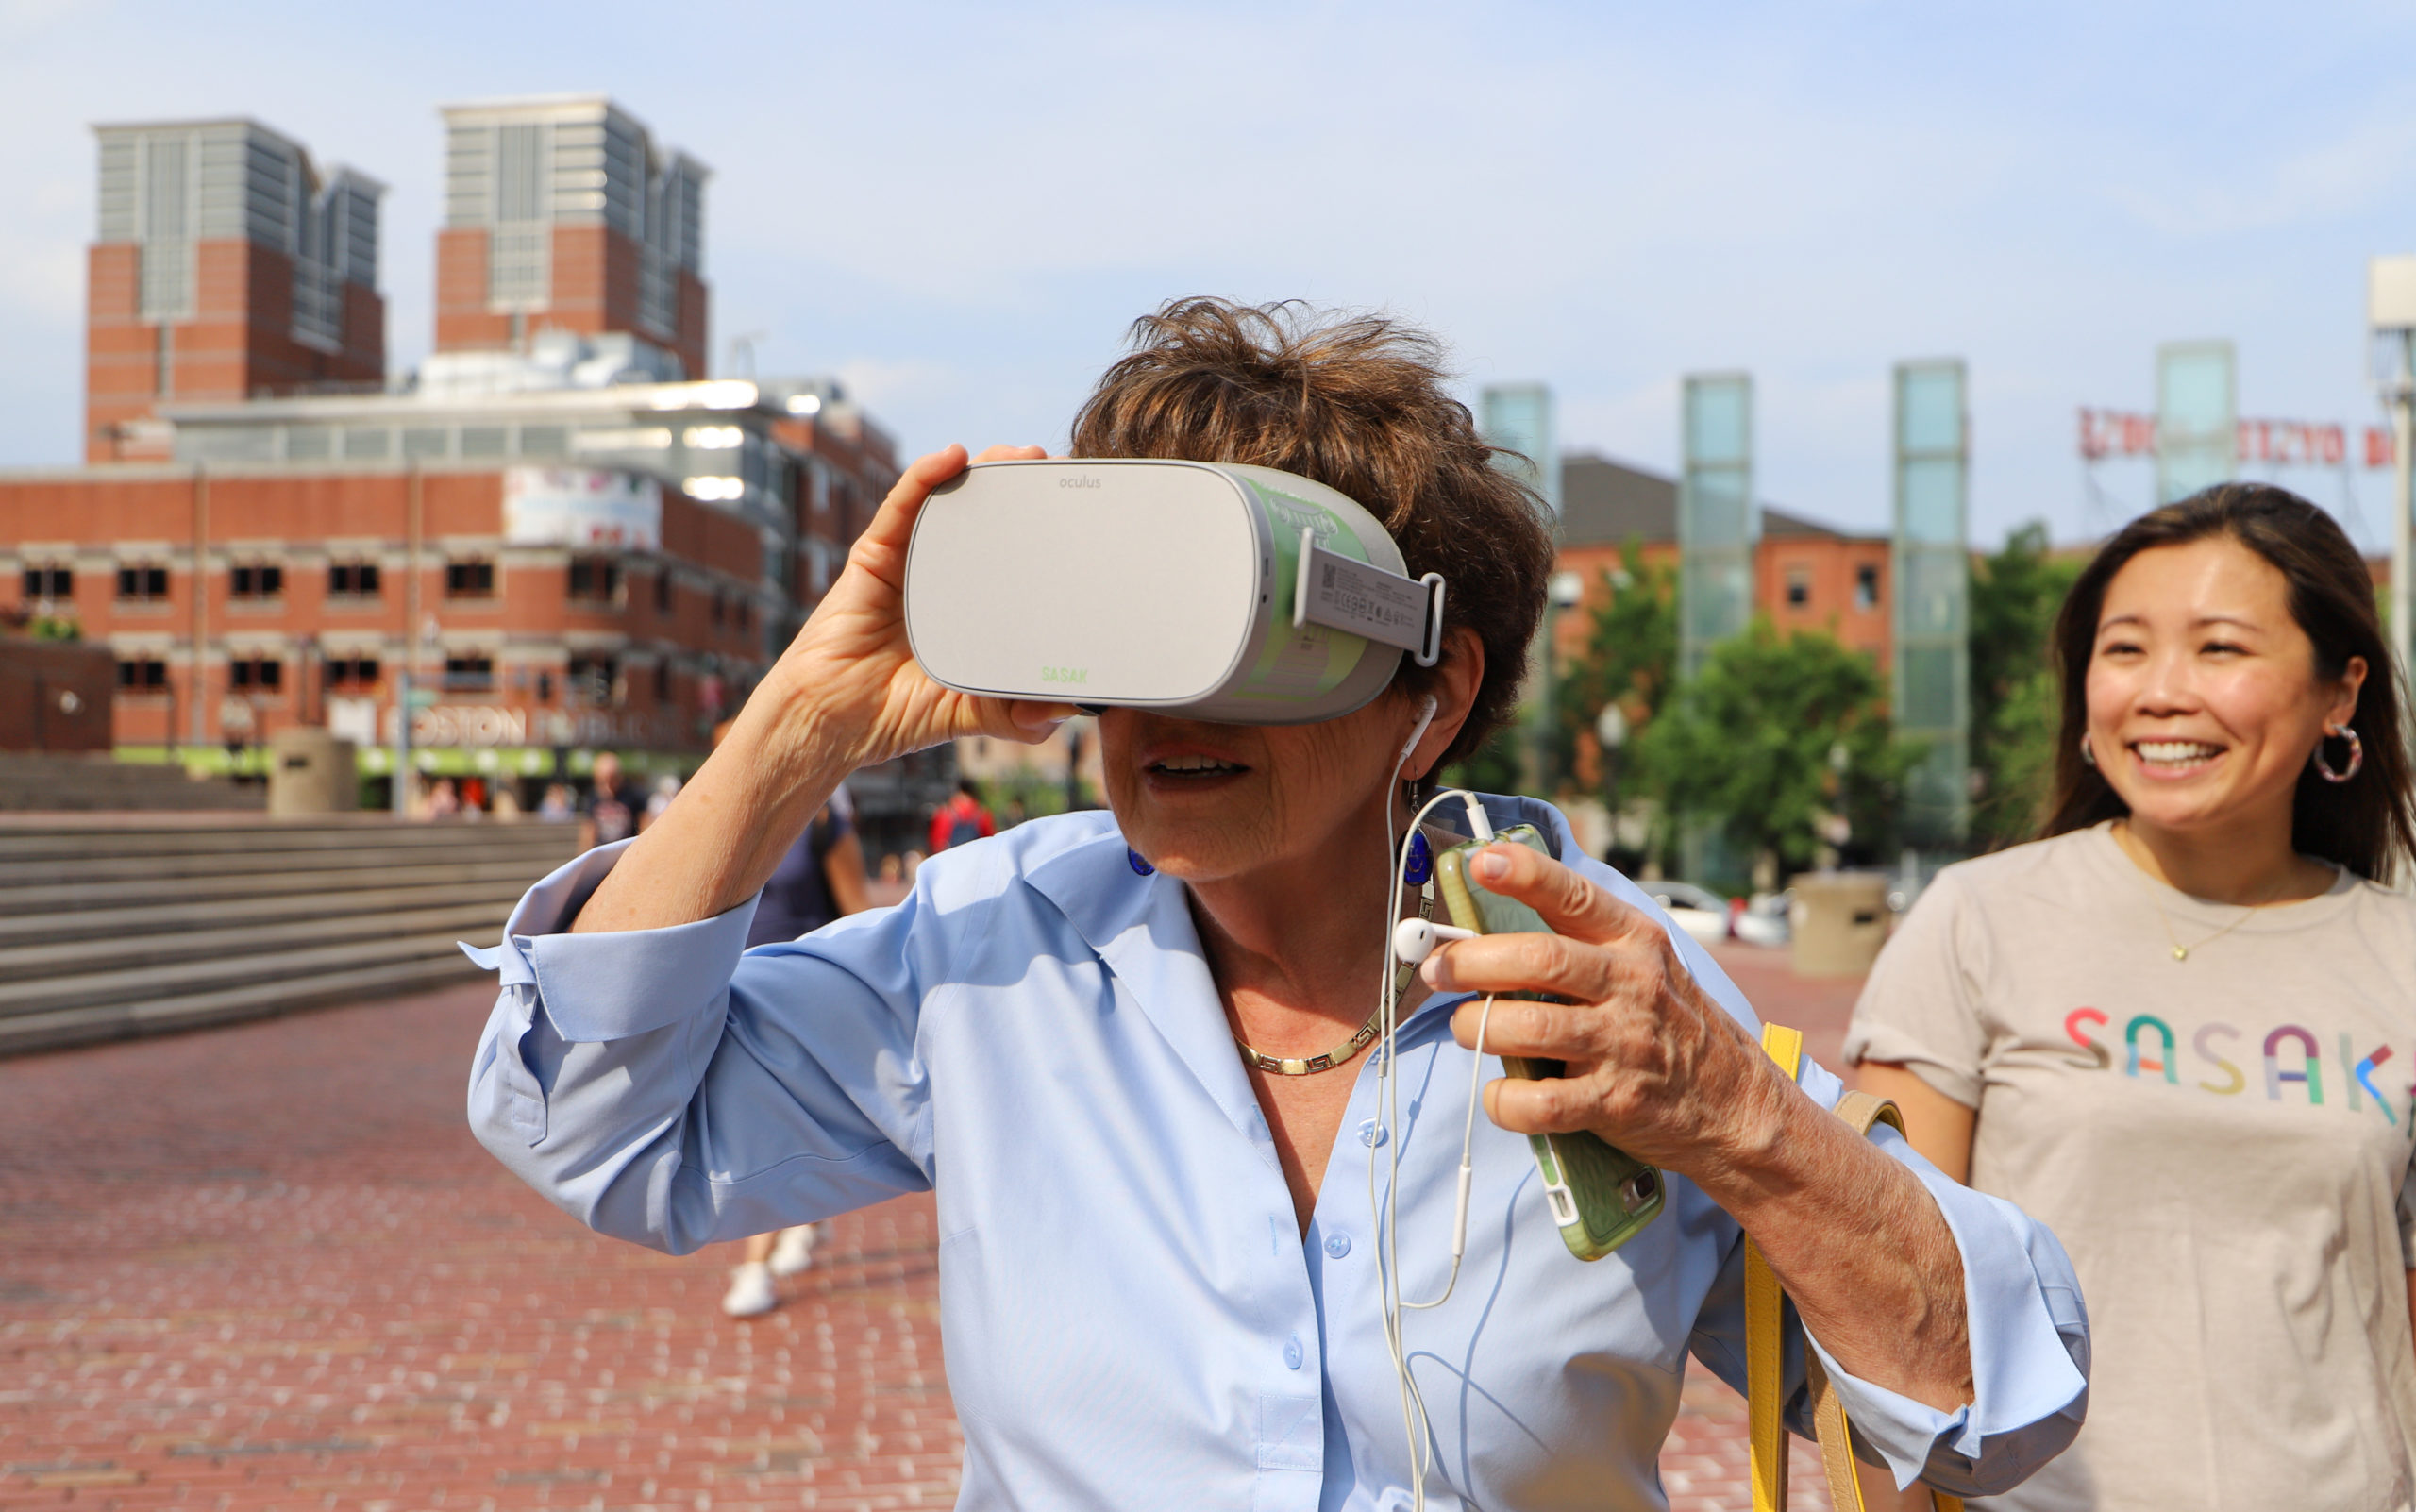 Older woman looking through VR goggles, person smiling in background